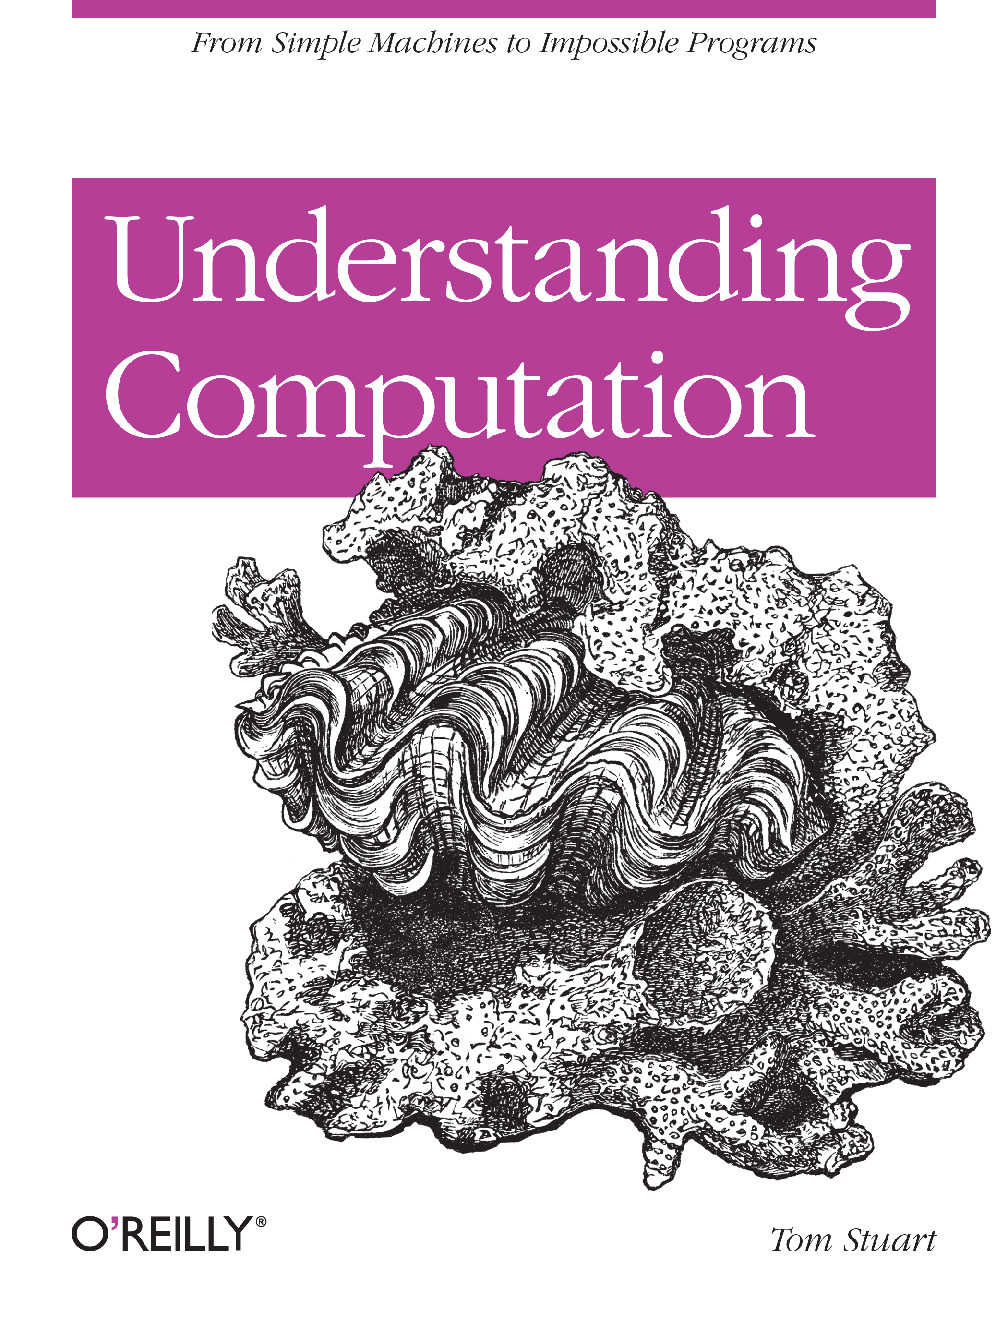 Understanding Computation – From Simple Machines to Impossible Programs